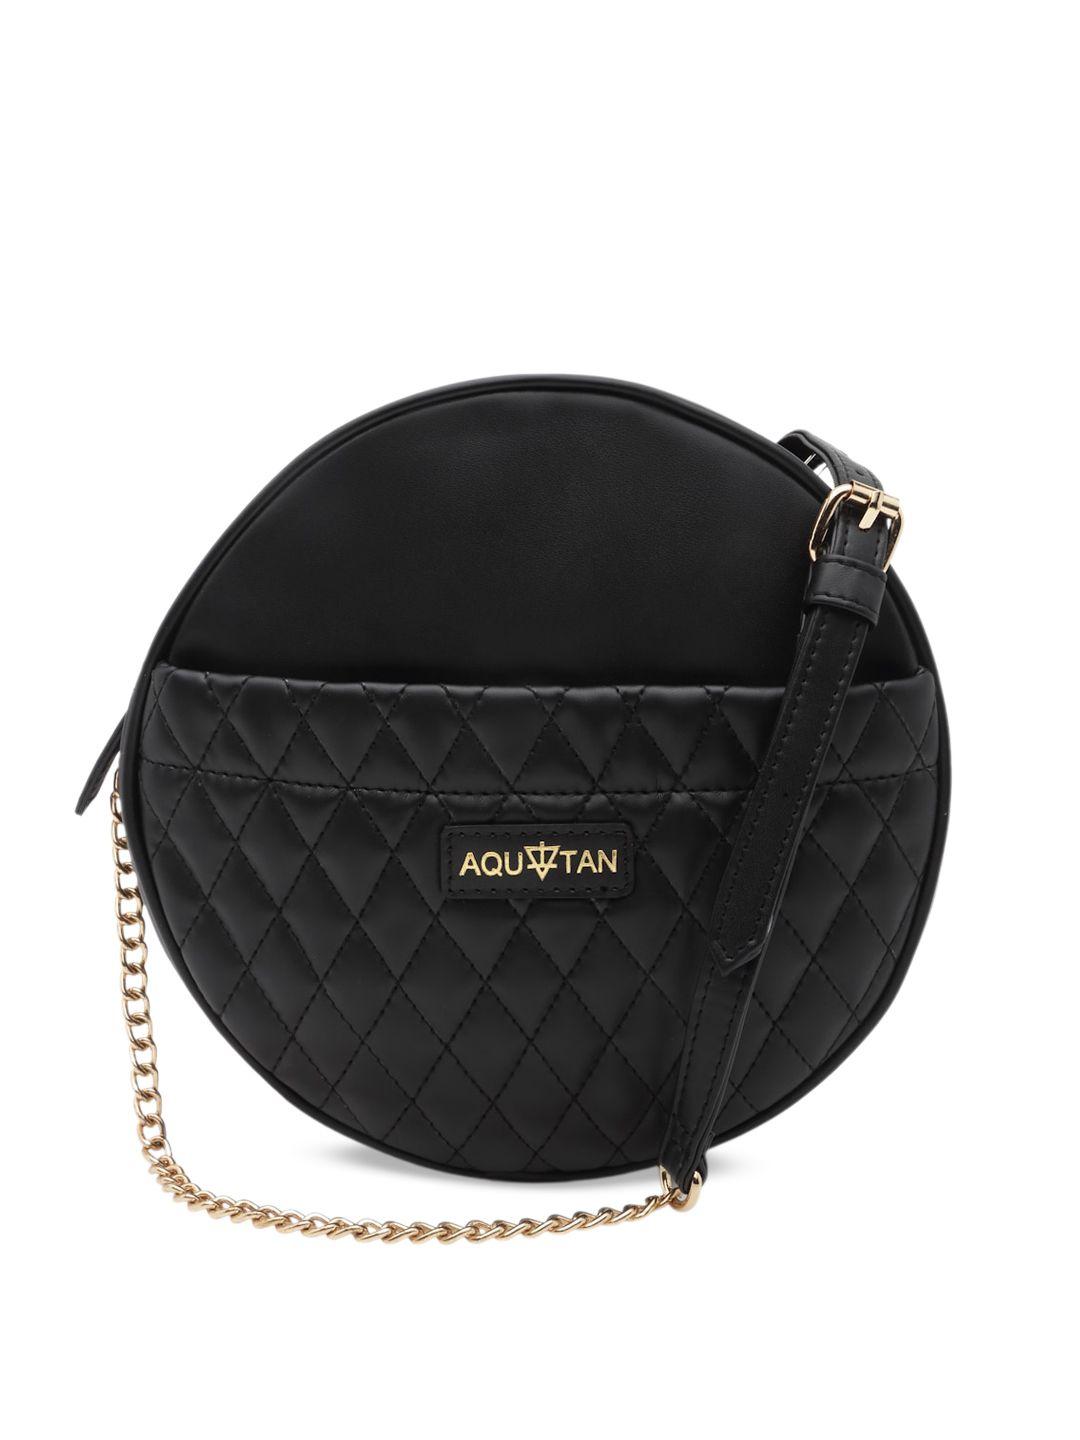 aquatan textured quilted structured small sling bag